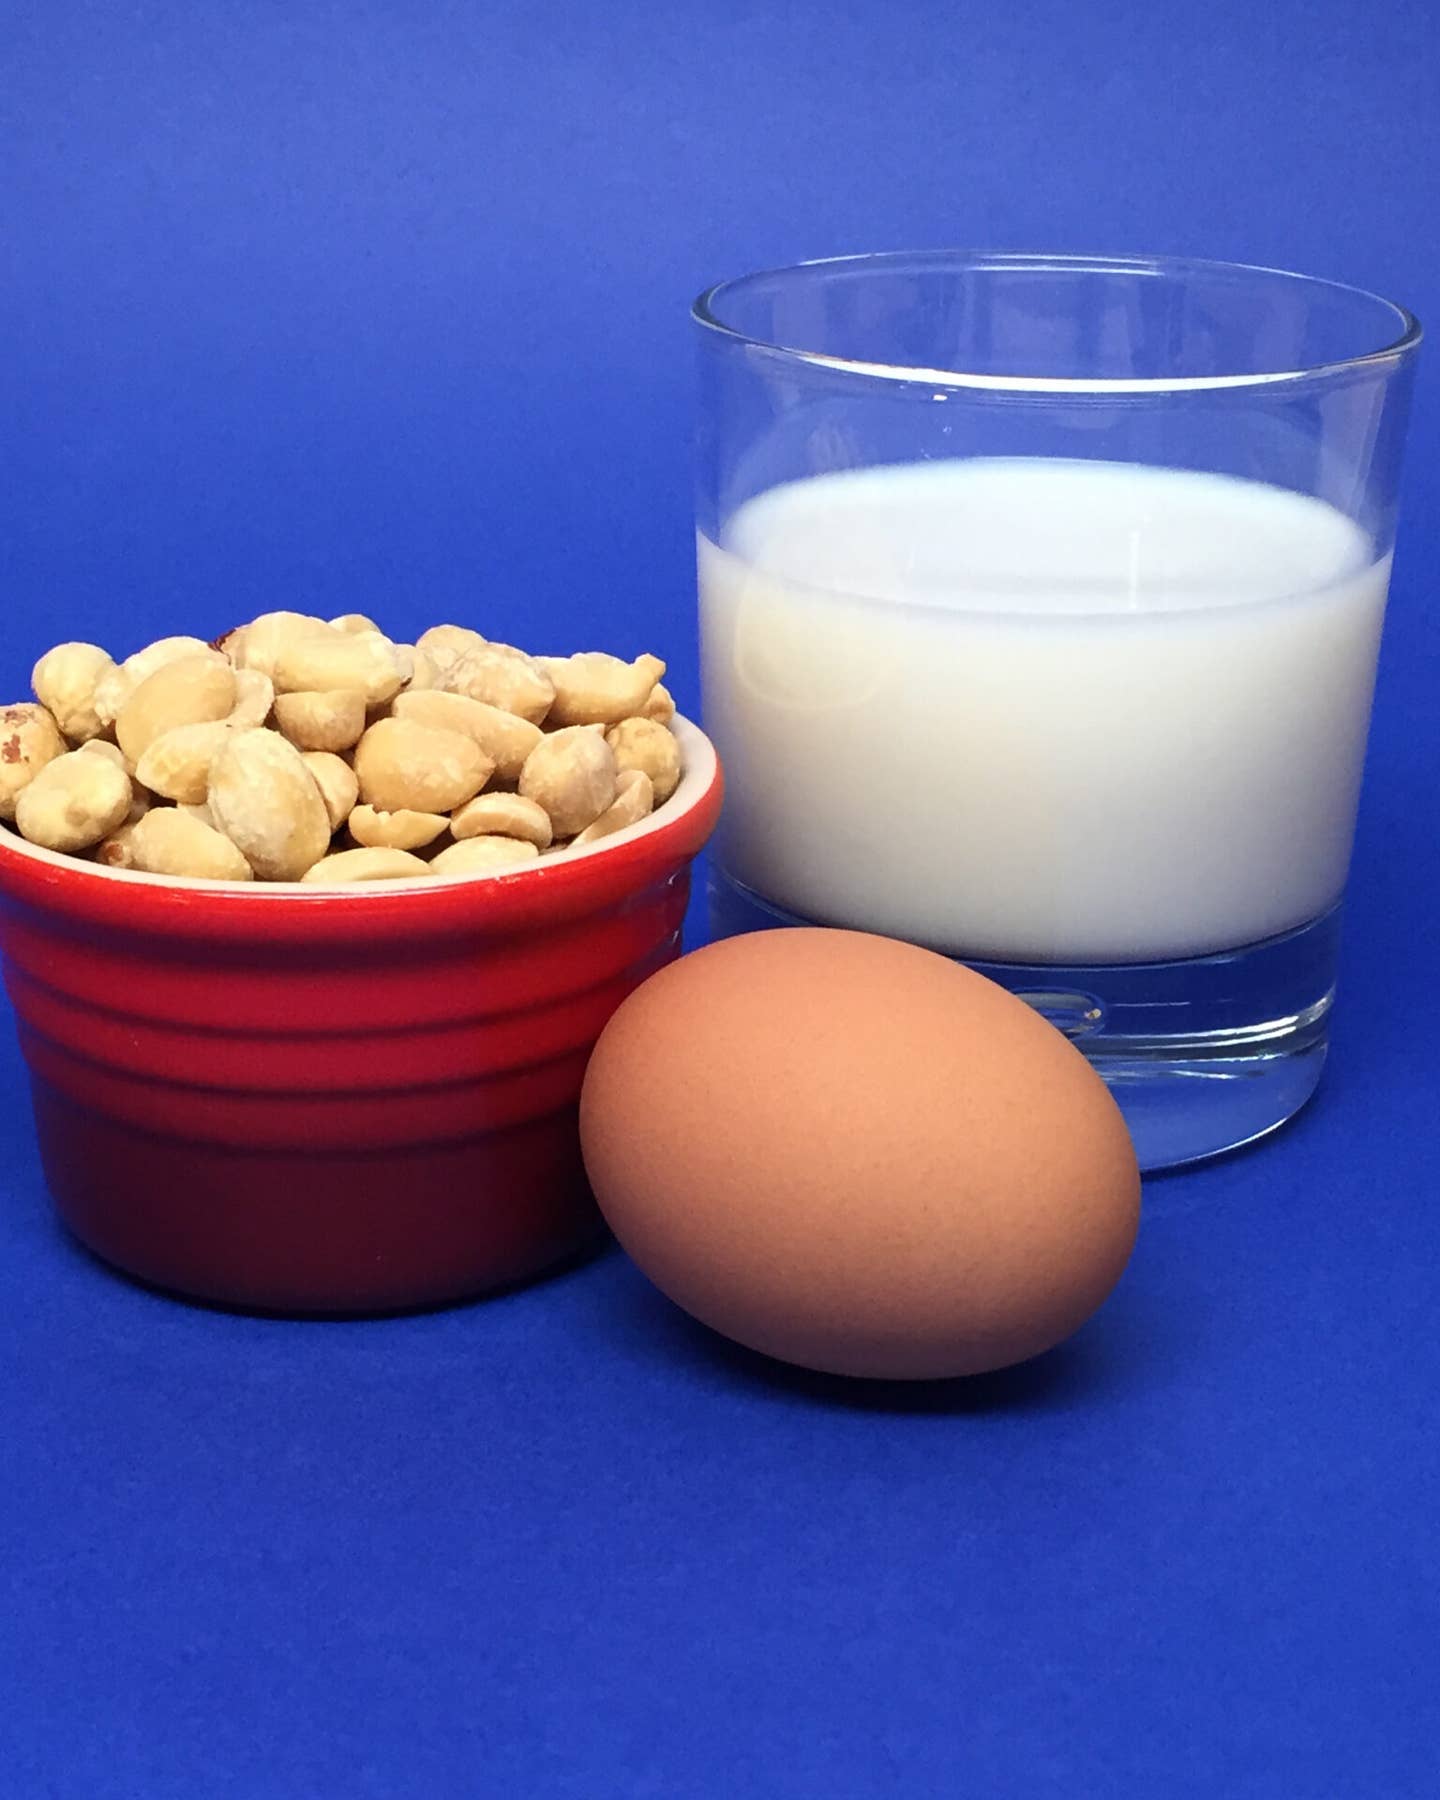 A New Test Can Help You Safely Check if You’ve Outgrown Your Food Allergies